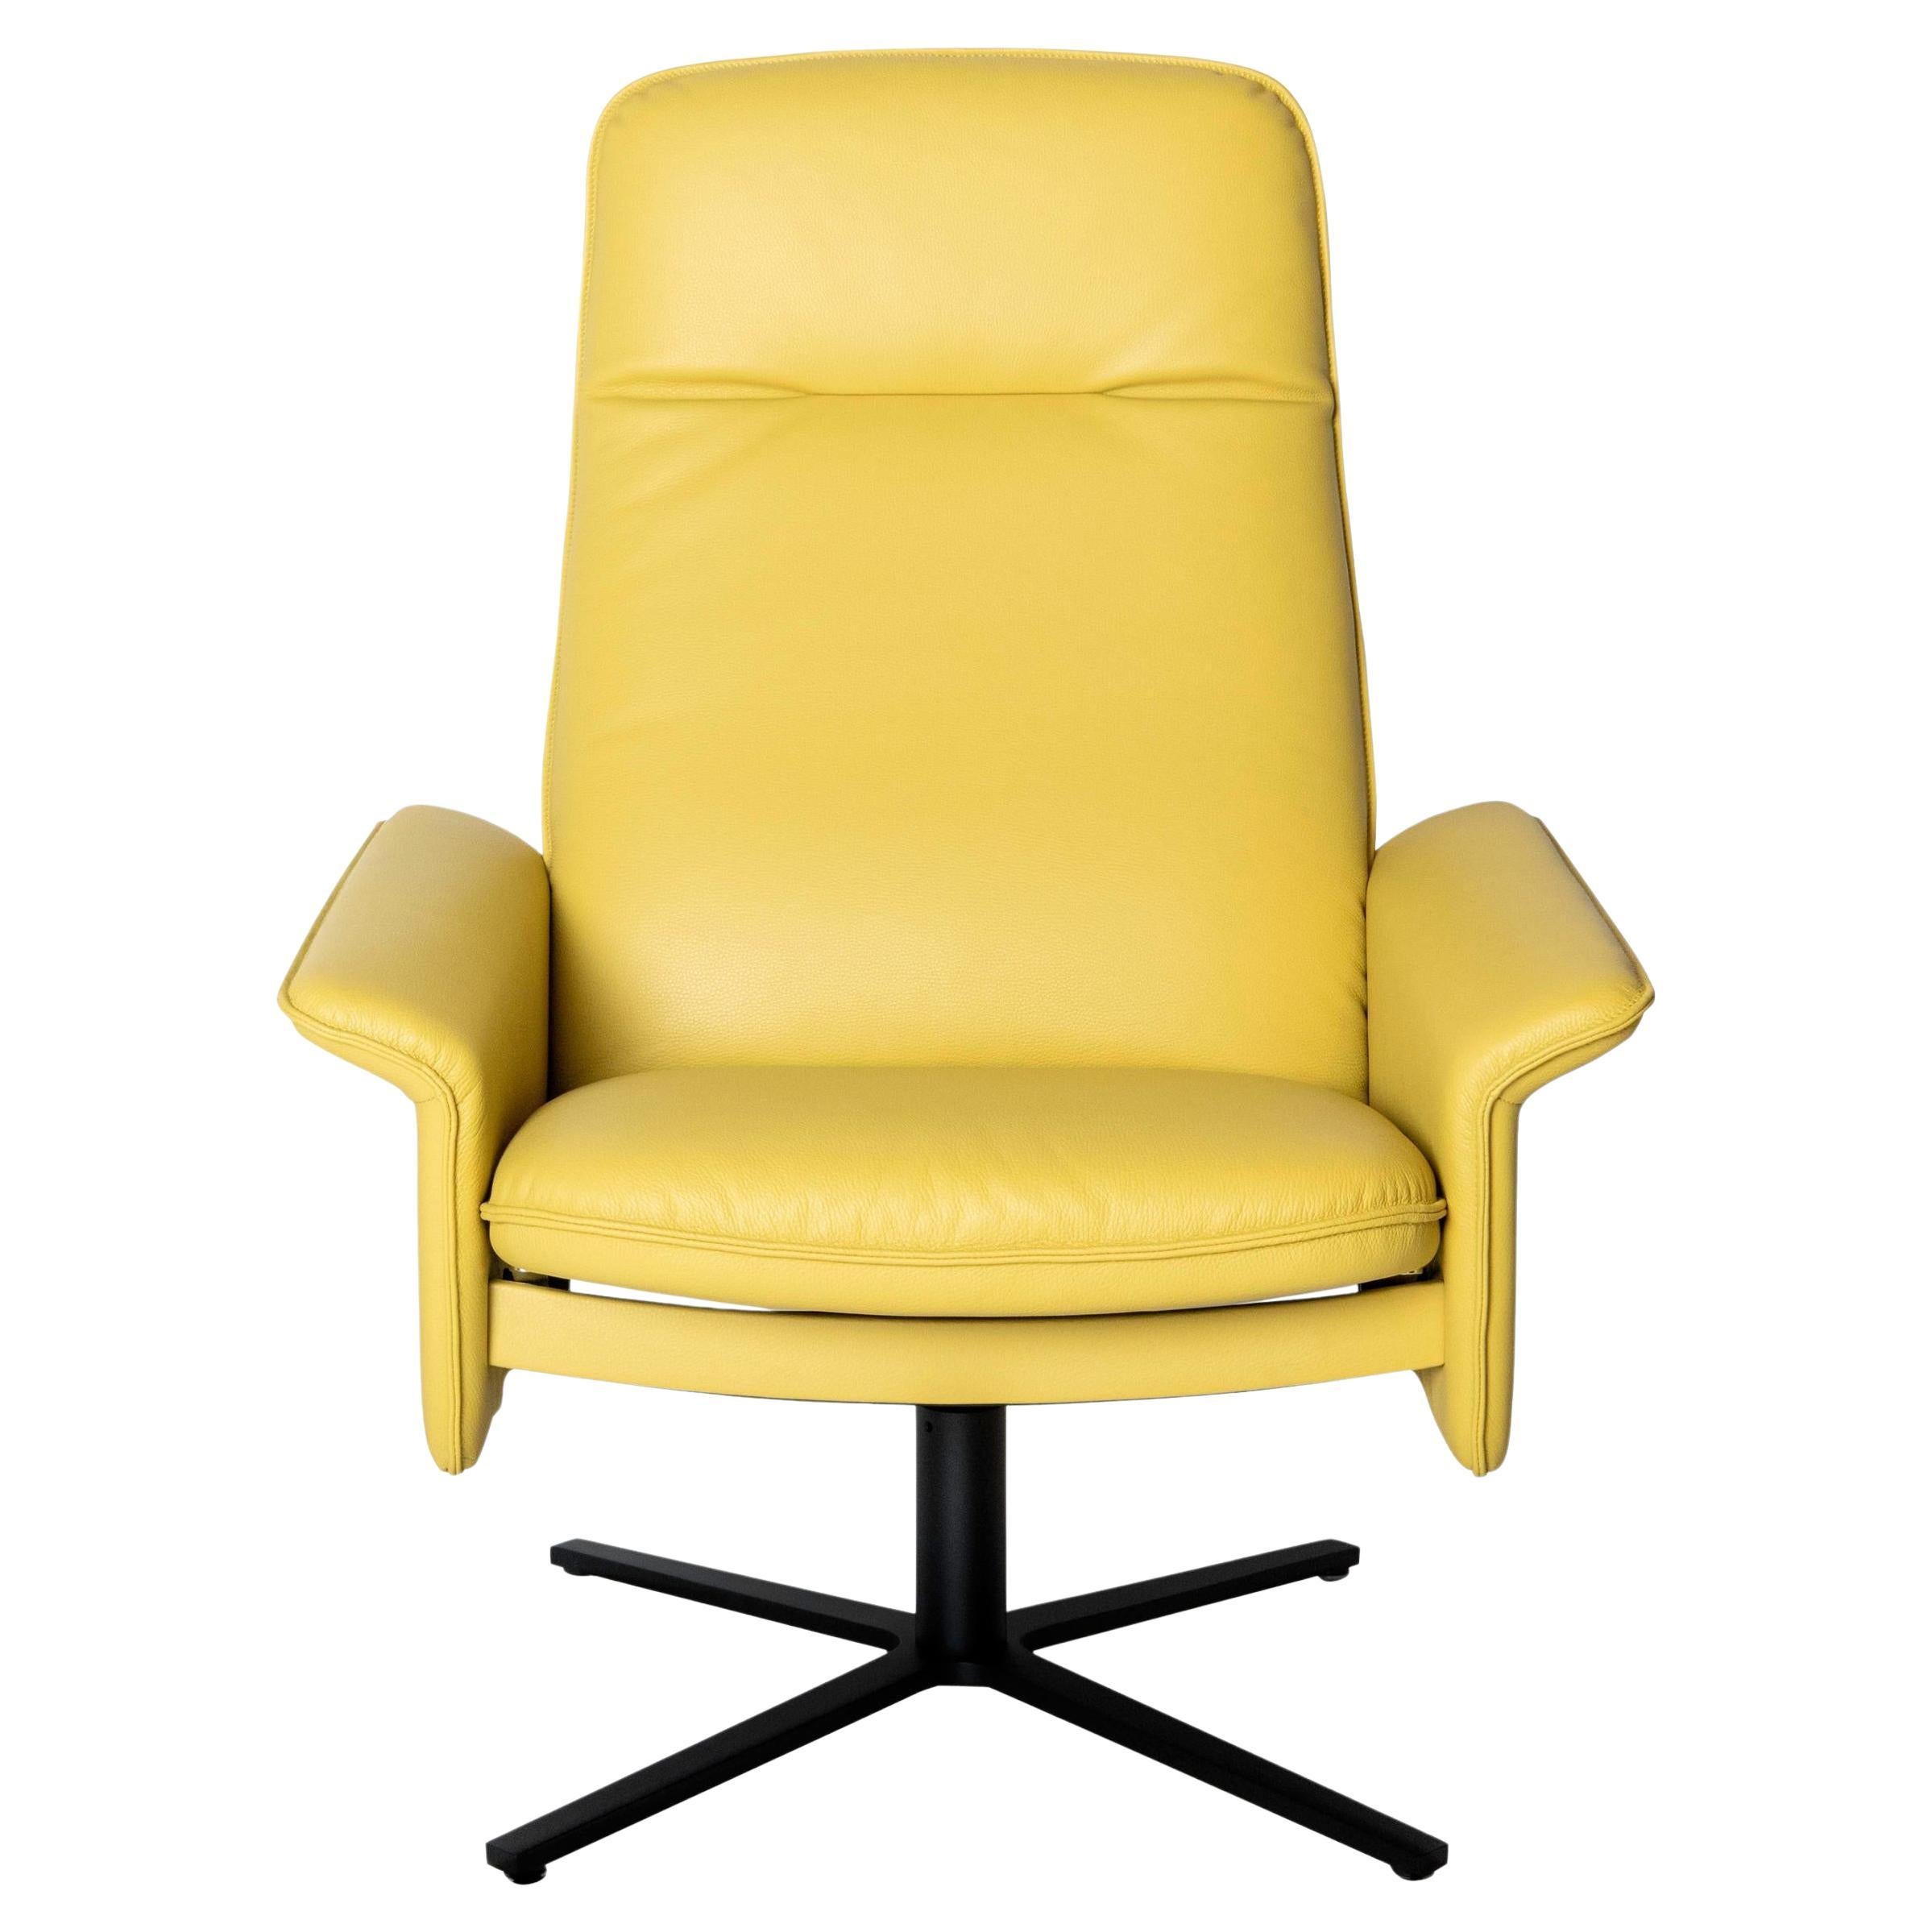 De Sede DS 55 High Back Chair in Yellow Leather Upholstery, De Sede Design Team For Sale